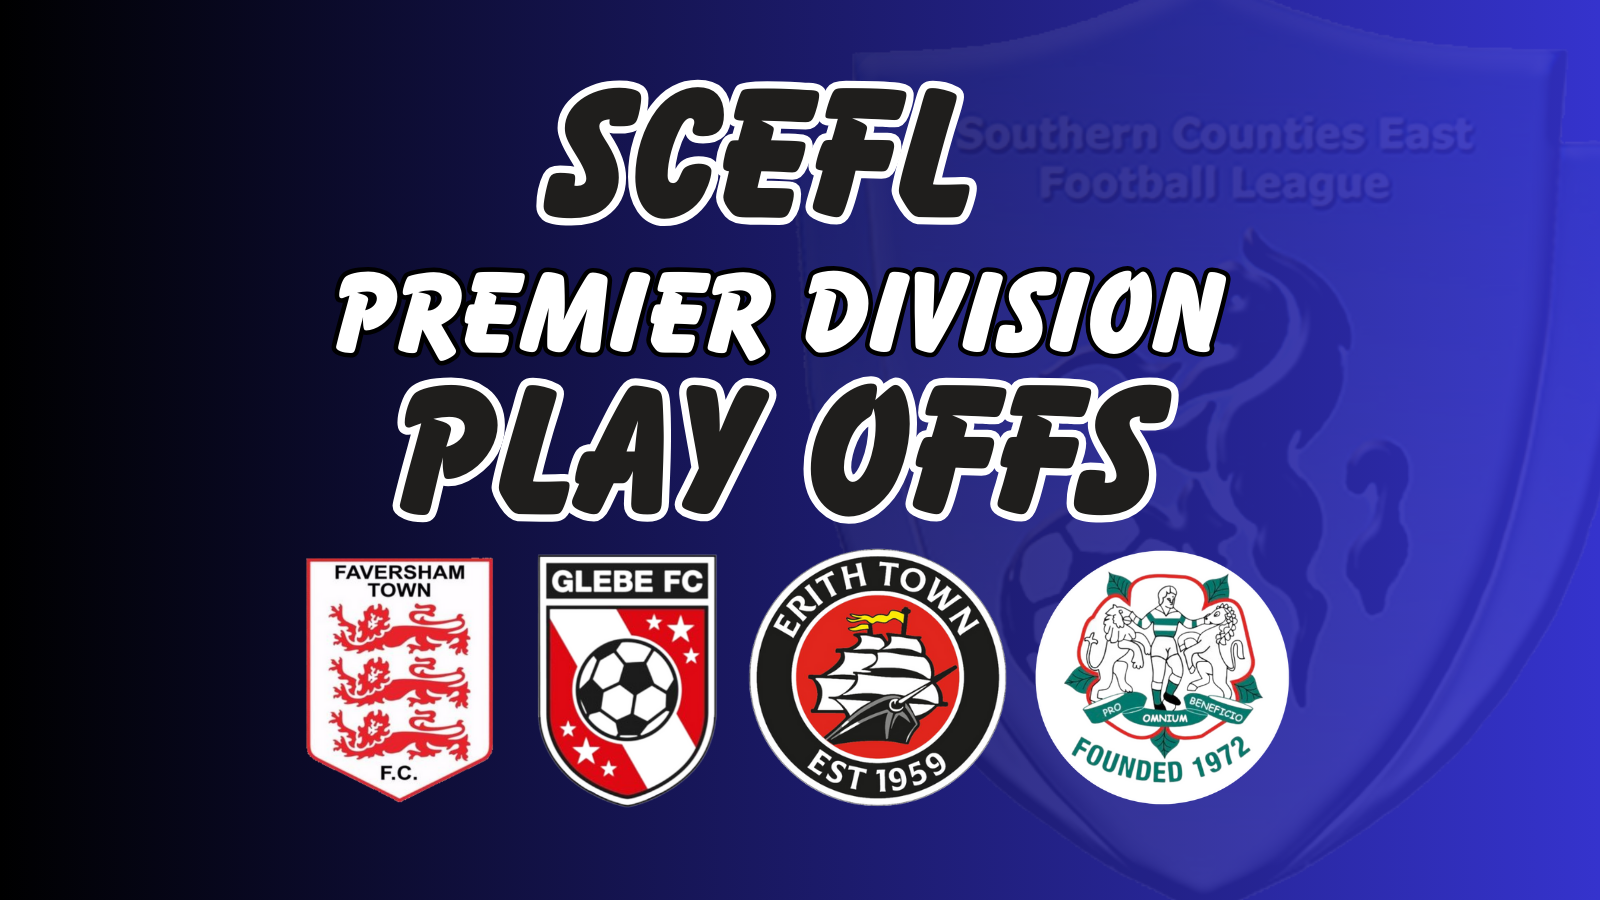 Premier Division Play Offs 23/24